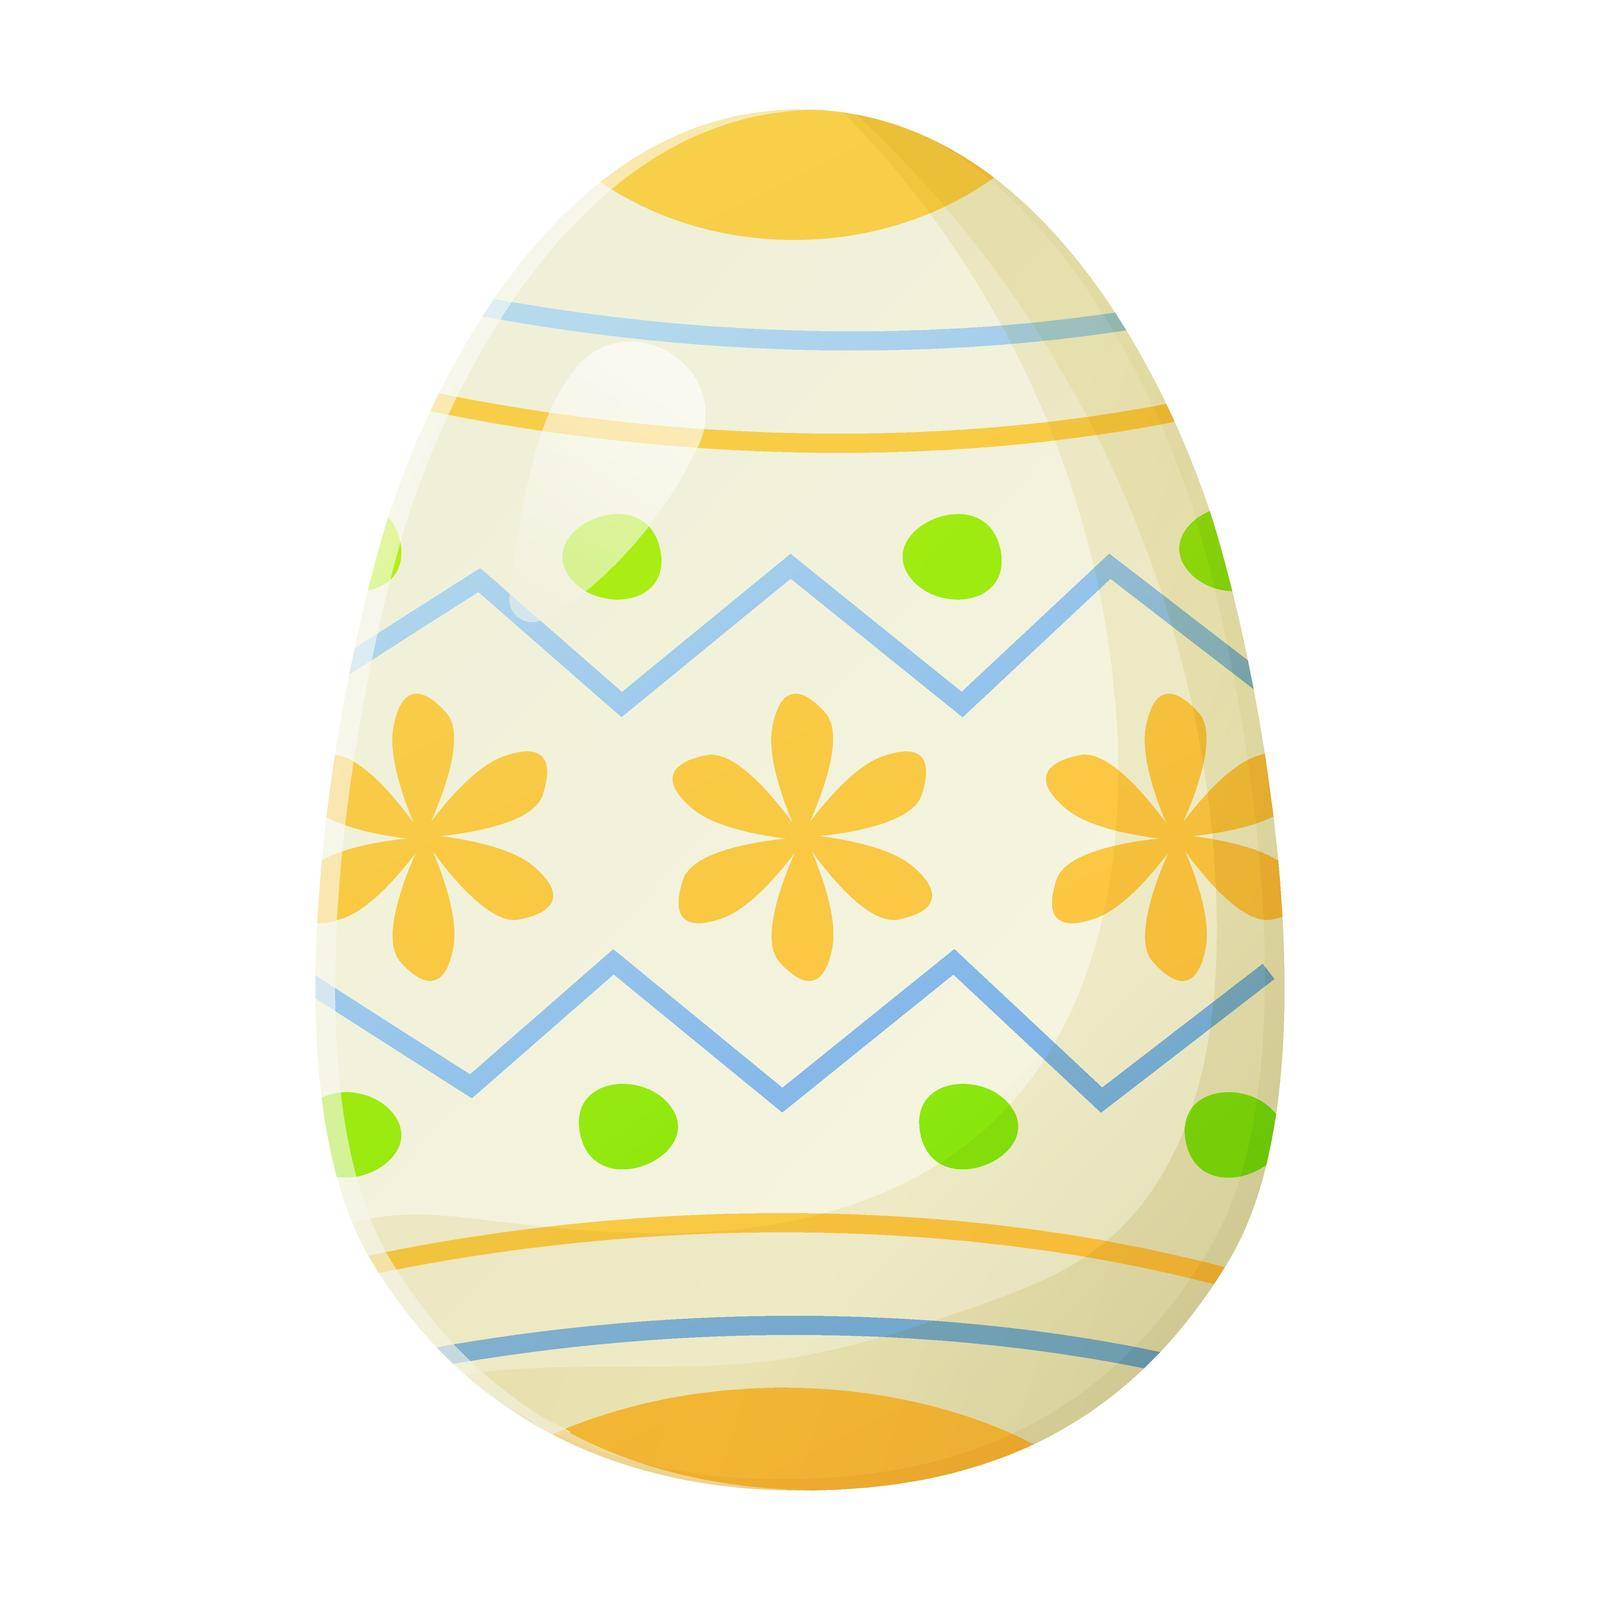 Cute realistic Easter egg painted with traditional national ornament . Can be used as easter hunt element for web banners, posters and web pages. Stock vector illustration in cartoon style isolated on white.